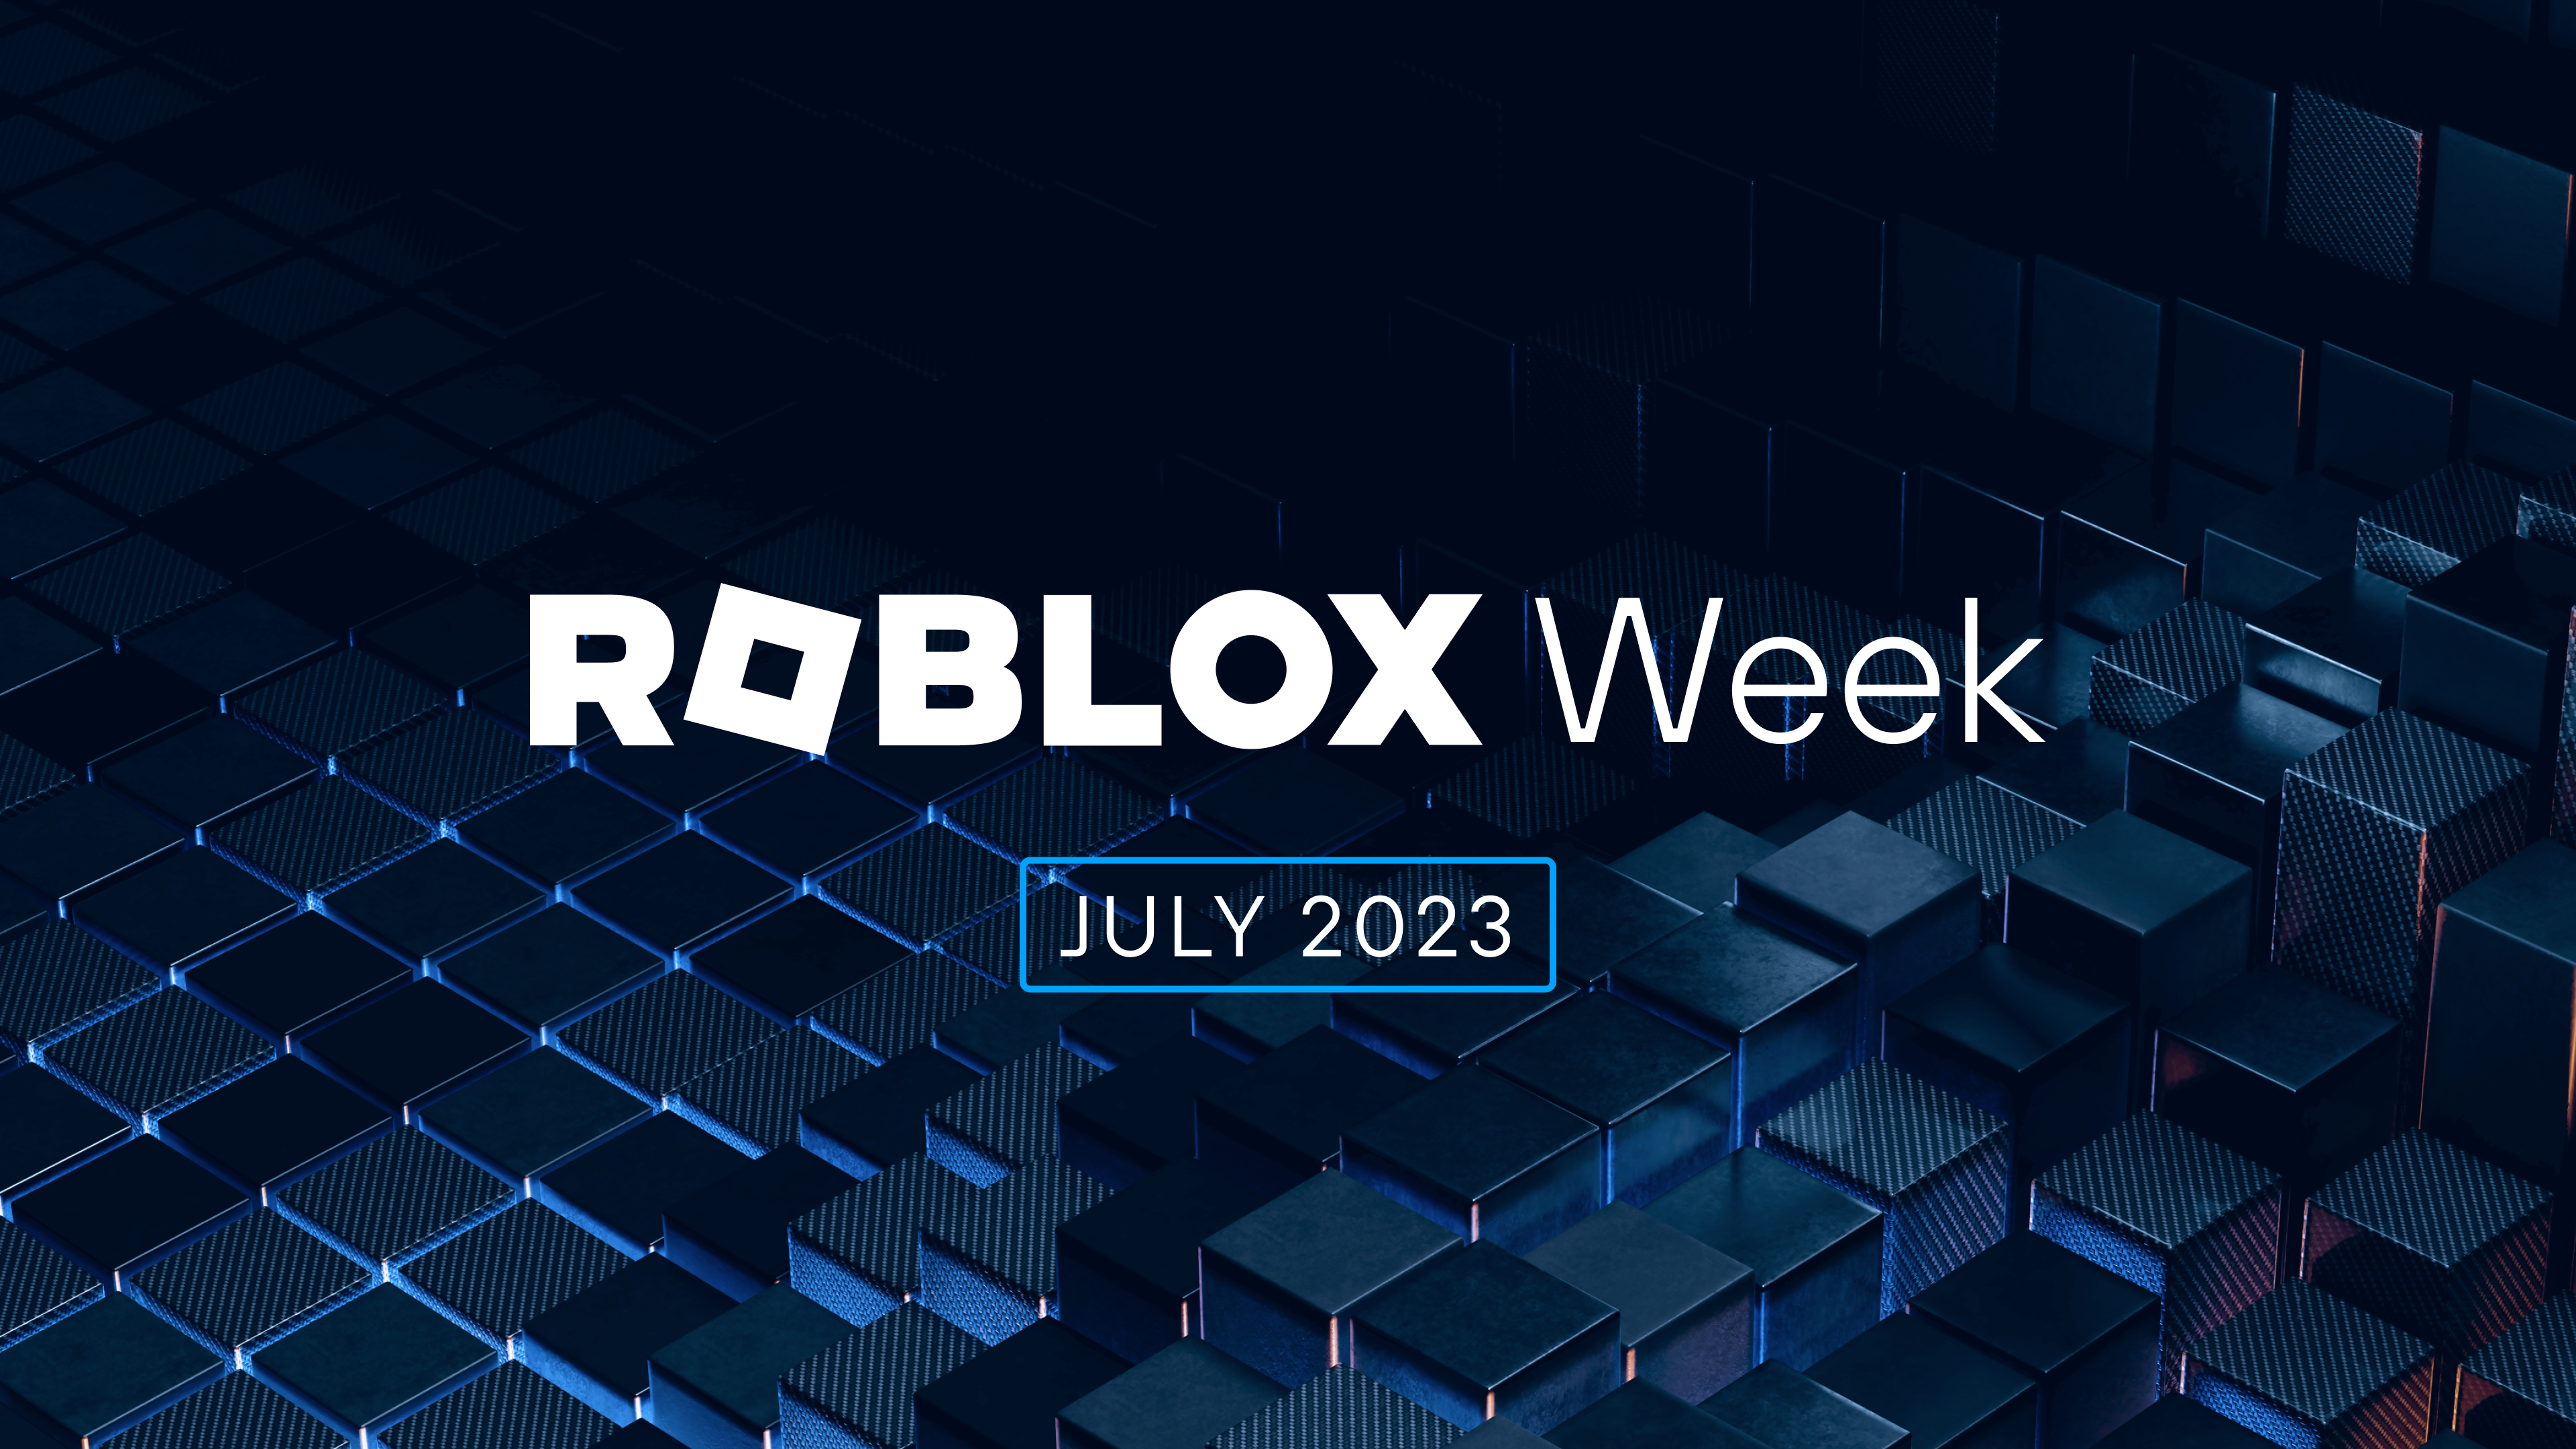 Roblox Week 2023: Innovation in Action - Roblox Blog